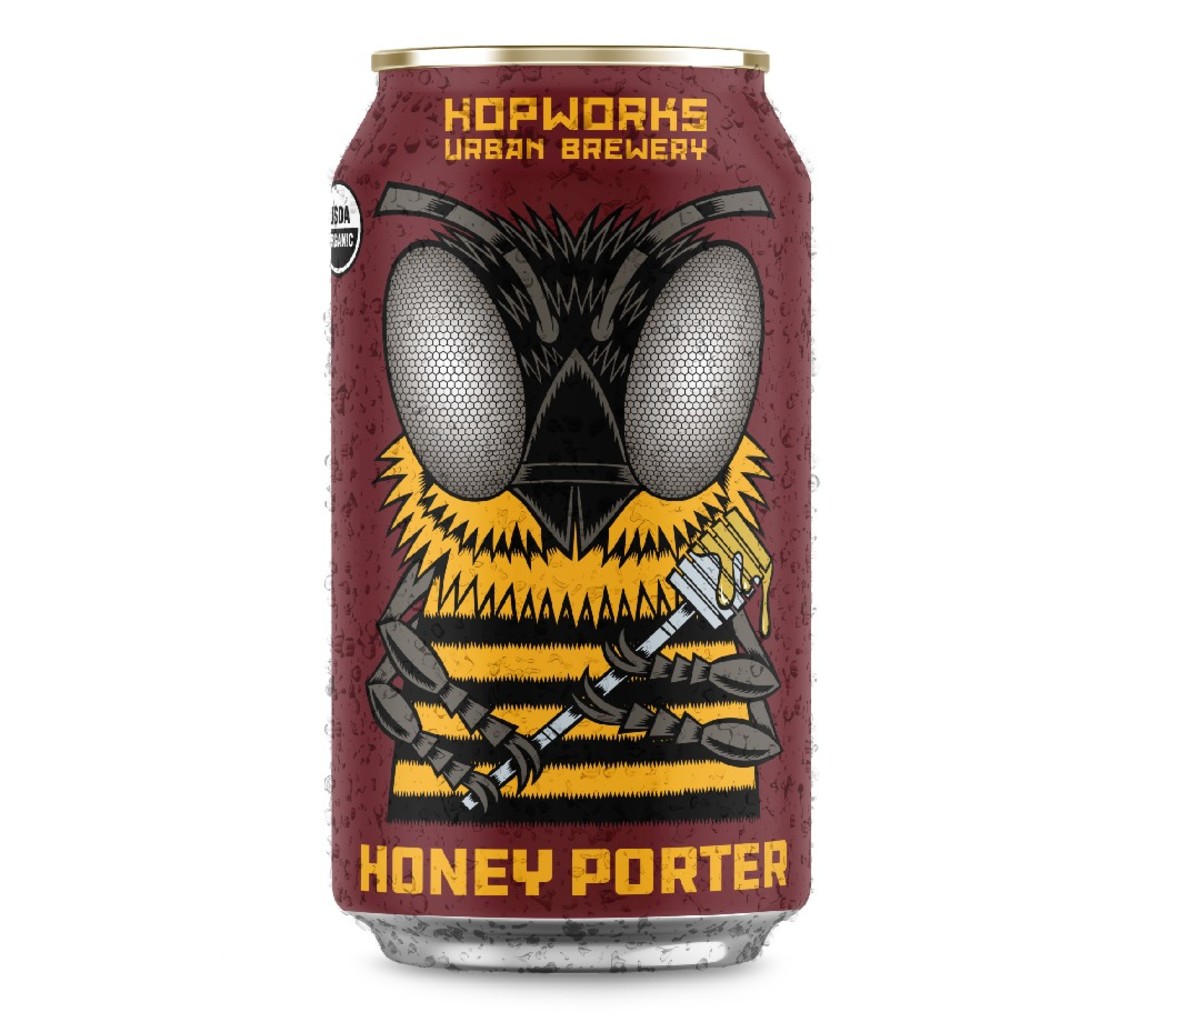 12 oz can of eestly Organic Honey Porter from Hopworks Urban Brewery